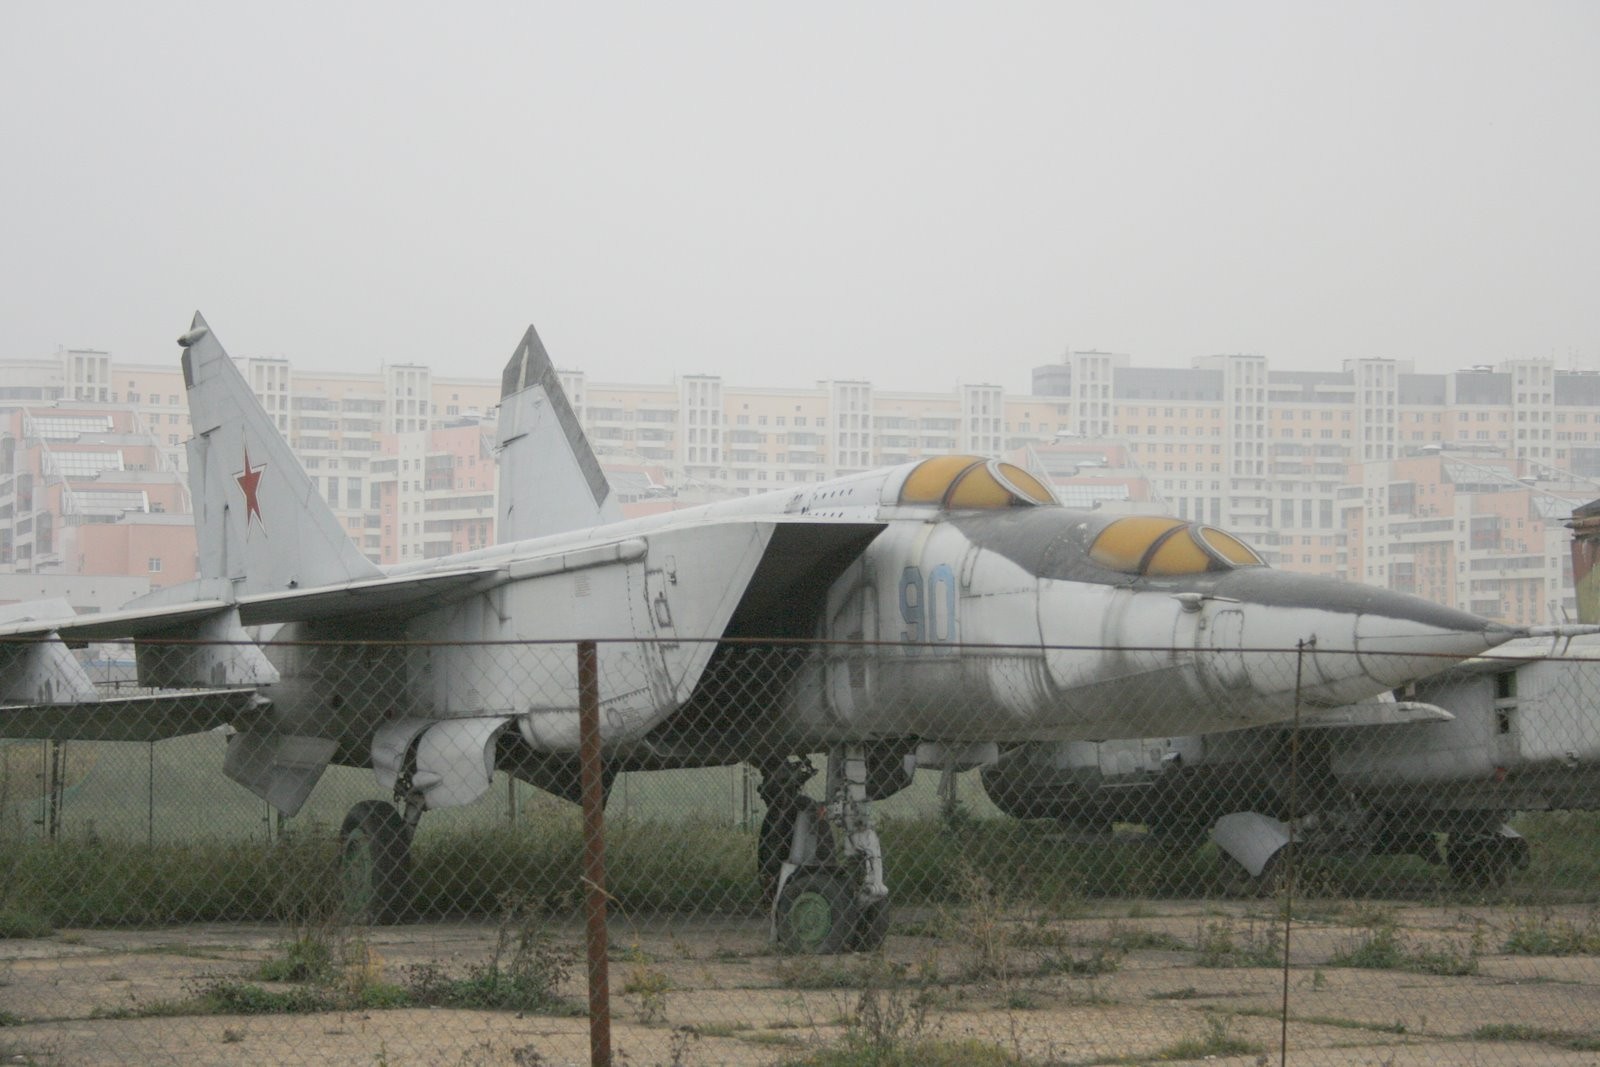 General 1600x1067 jets USSR military aircraft aircraft vehicle military vehicle Russian/Soviet aircraft Mikoyan-Gurevich military fence building